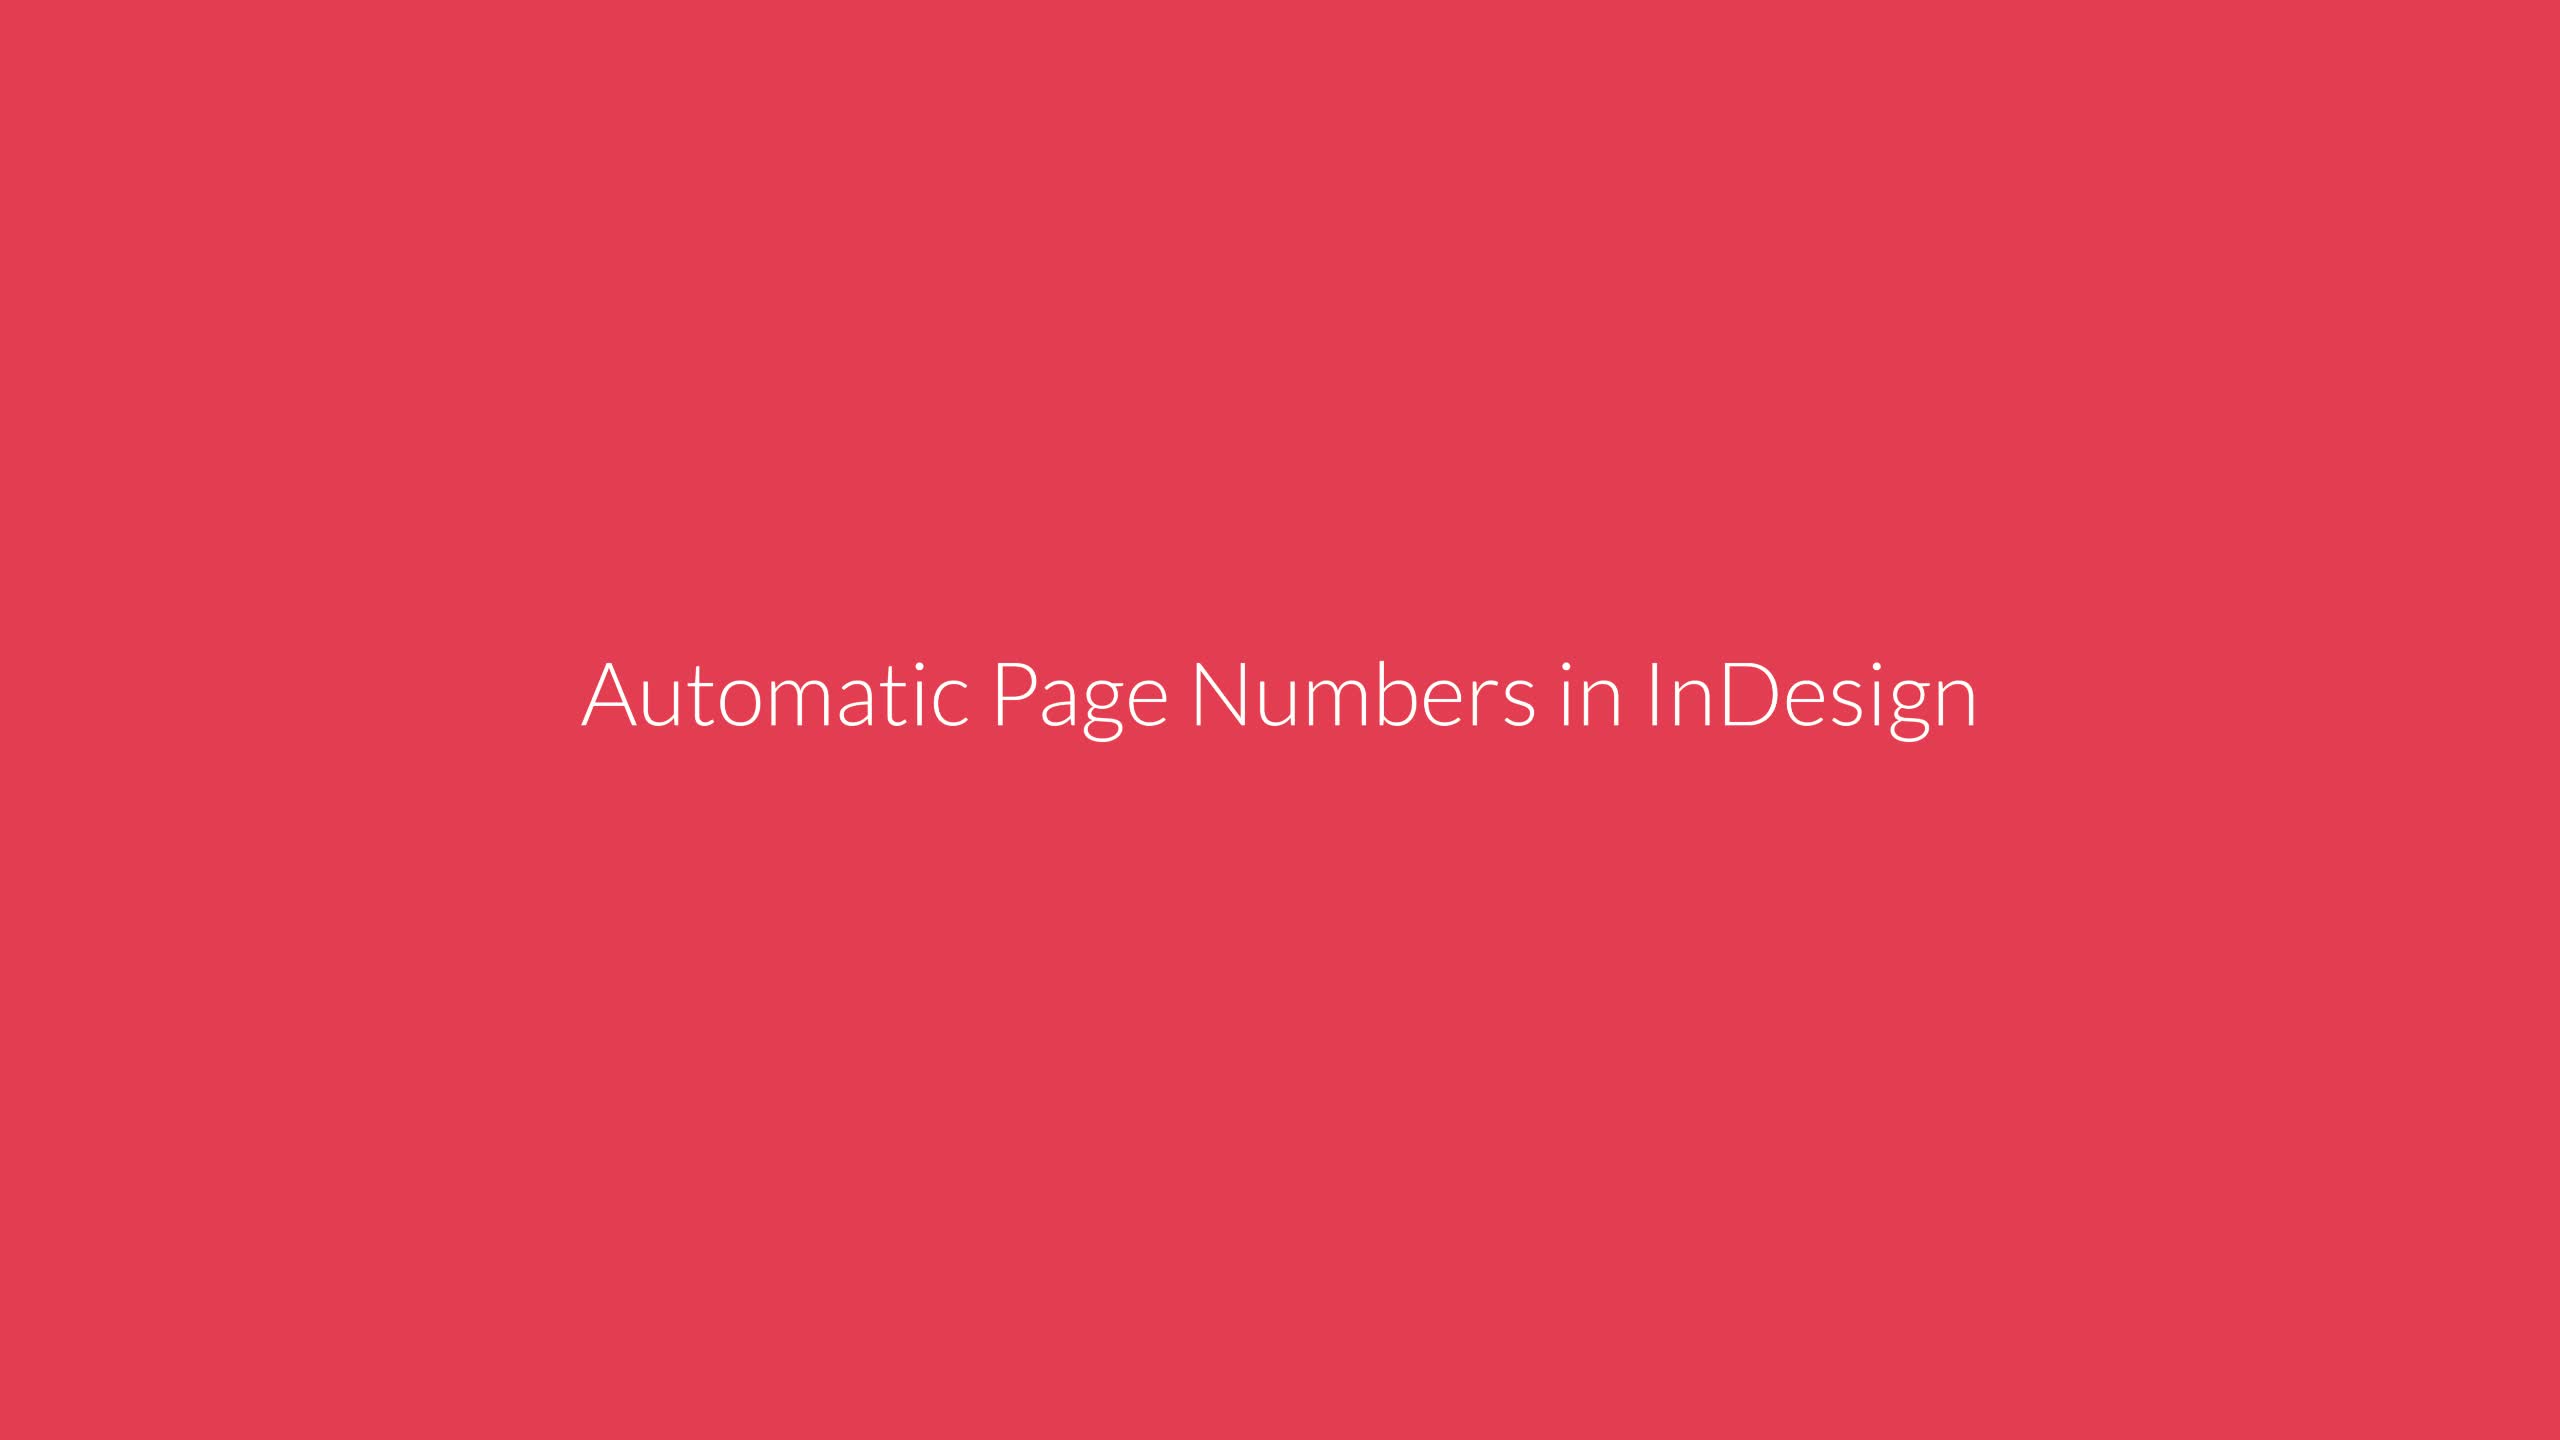 Automatic Page Number in InDesign